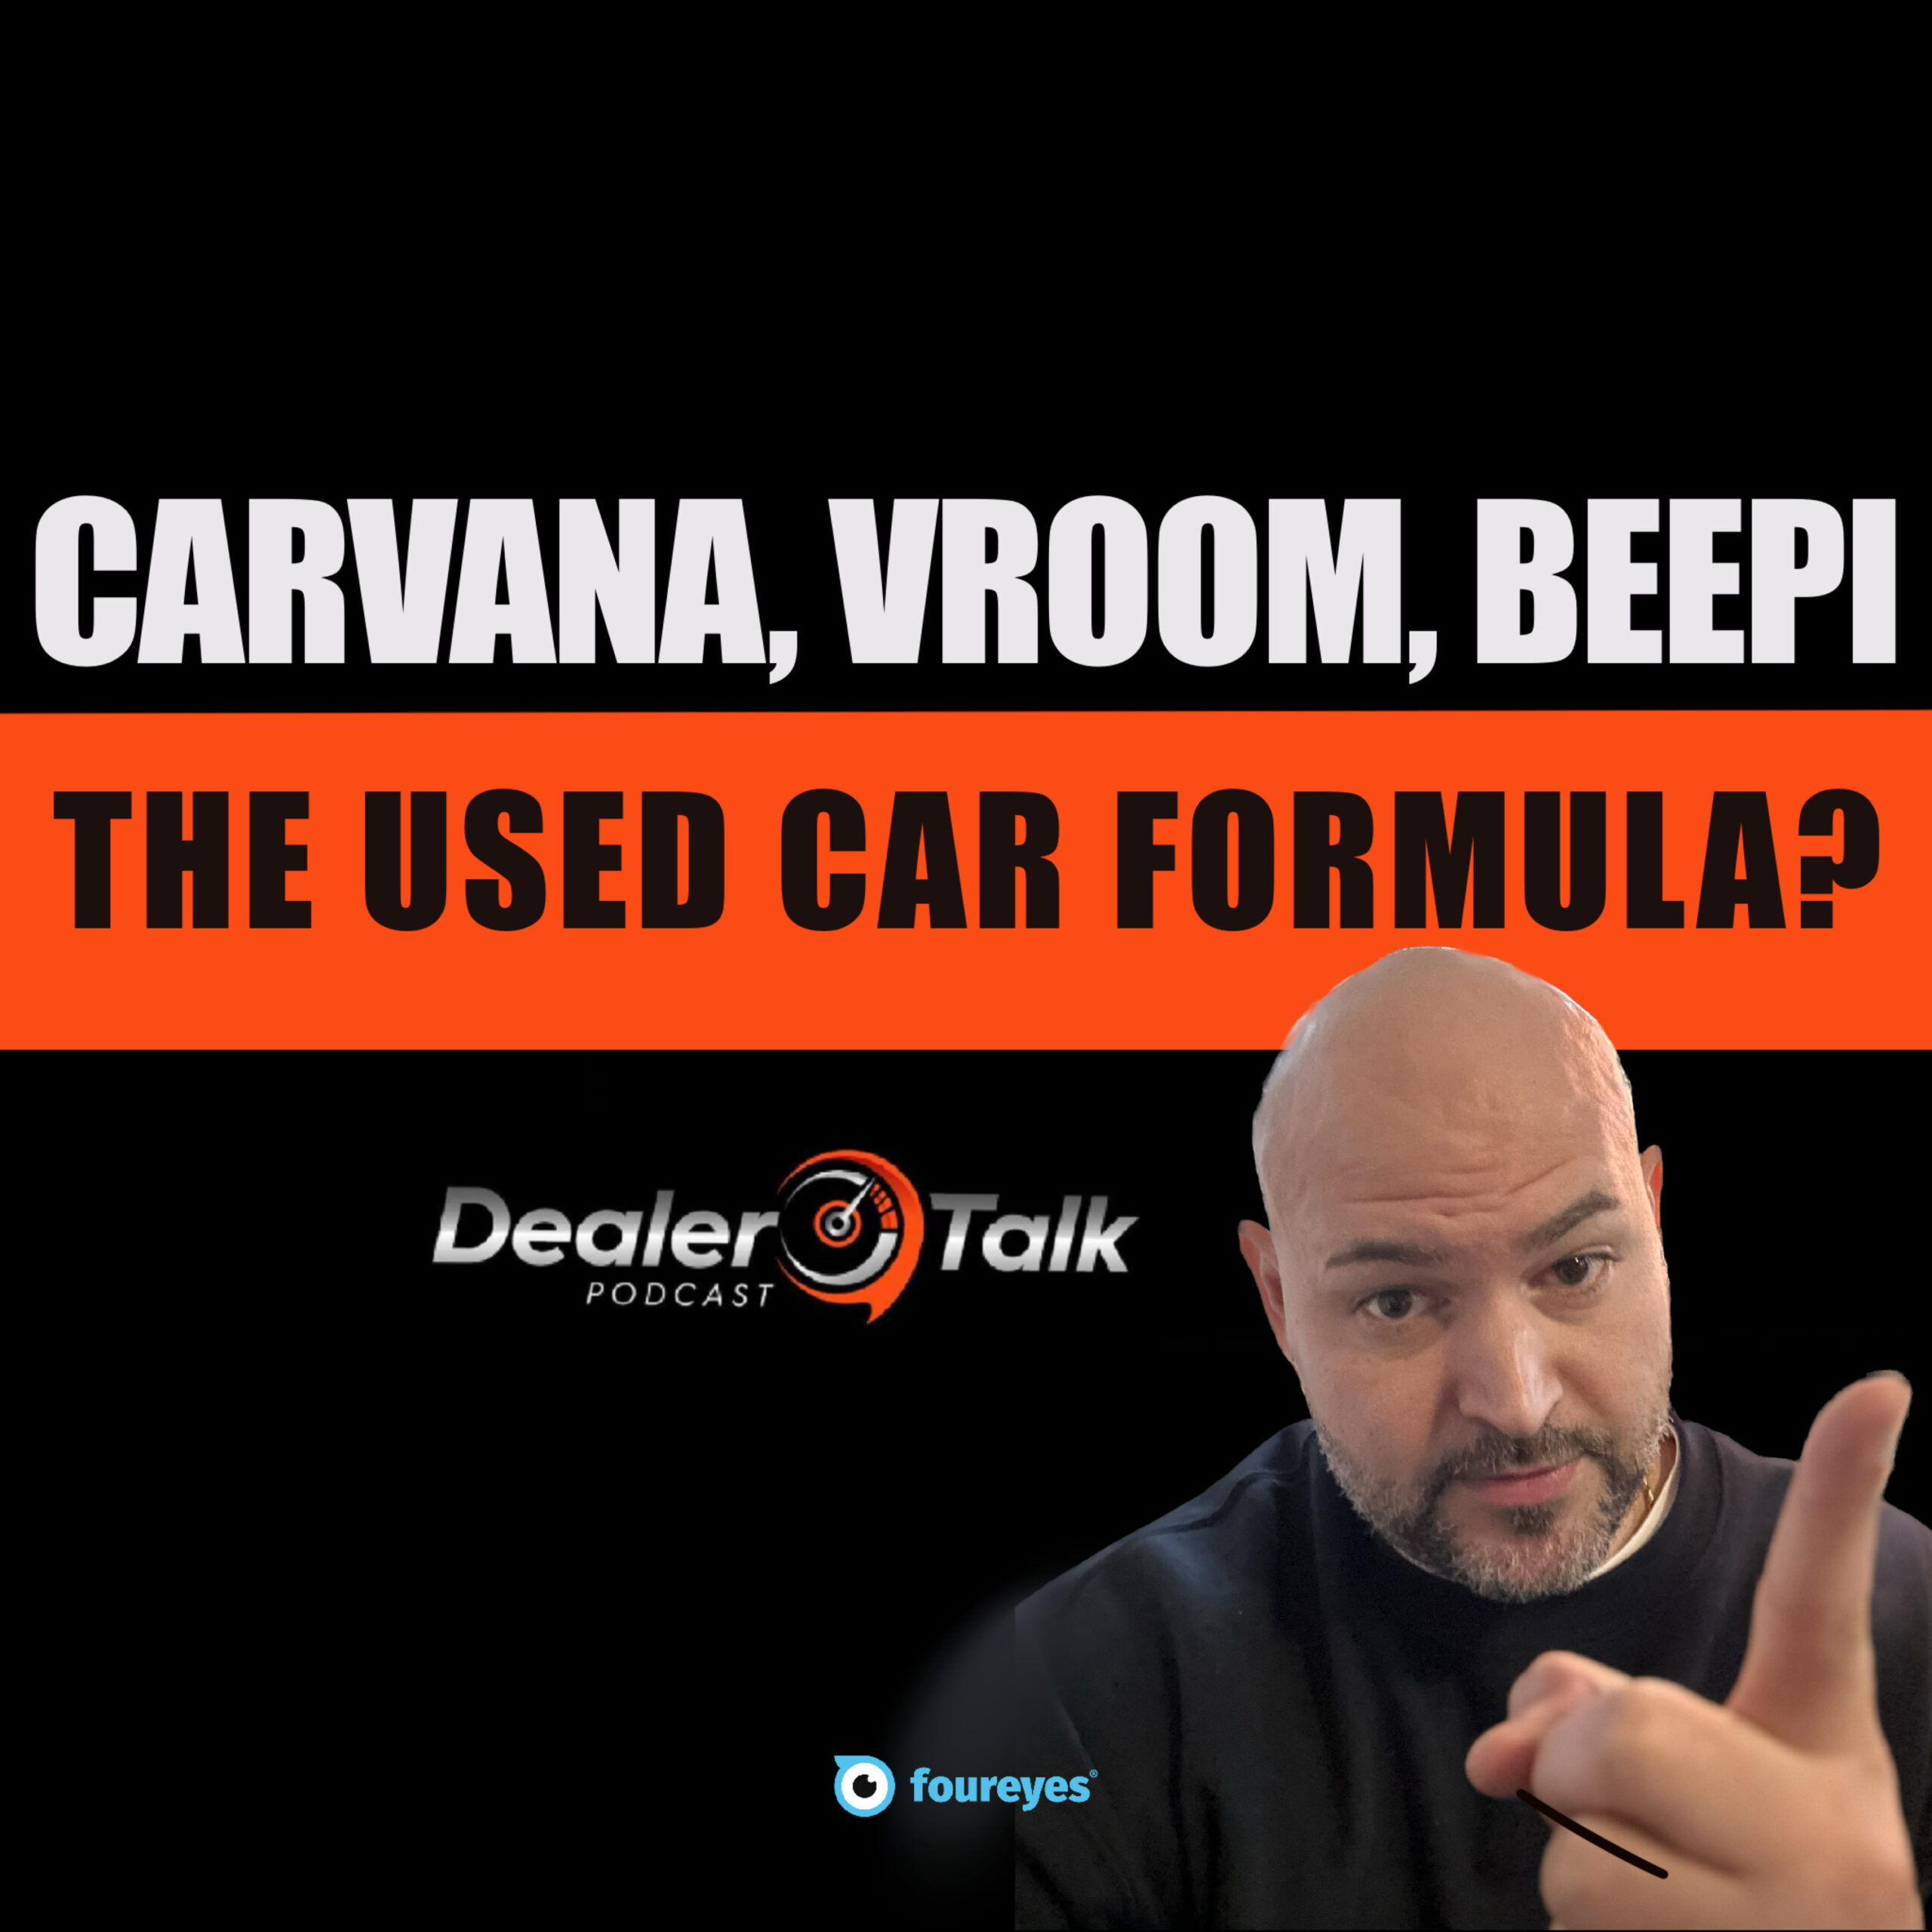 You are currently viewing Carvana, Vroom, Beepi: The Used Car Formula?